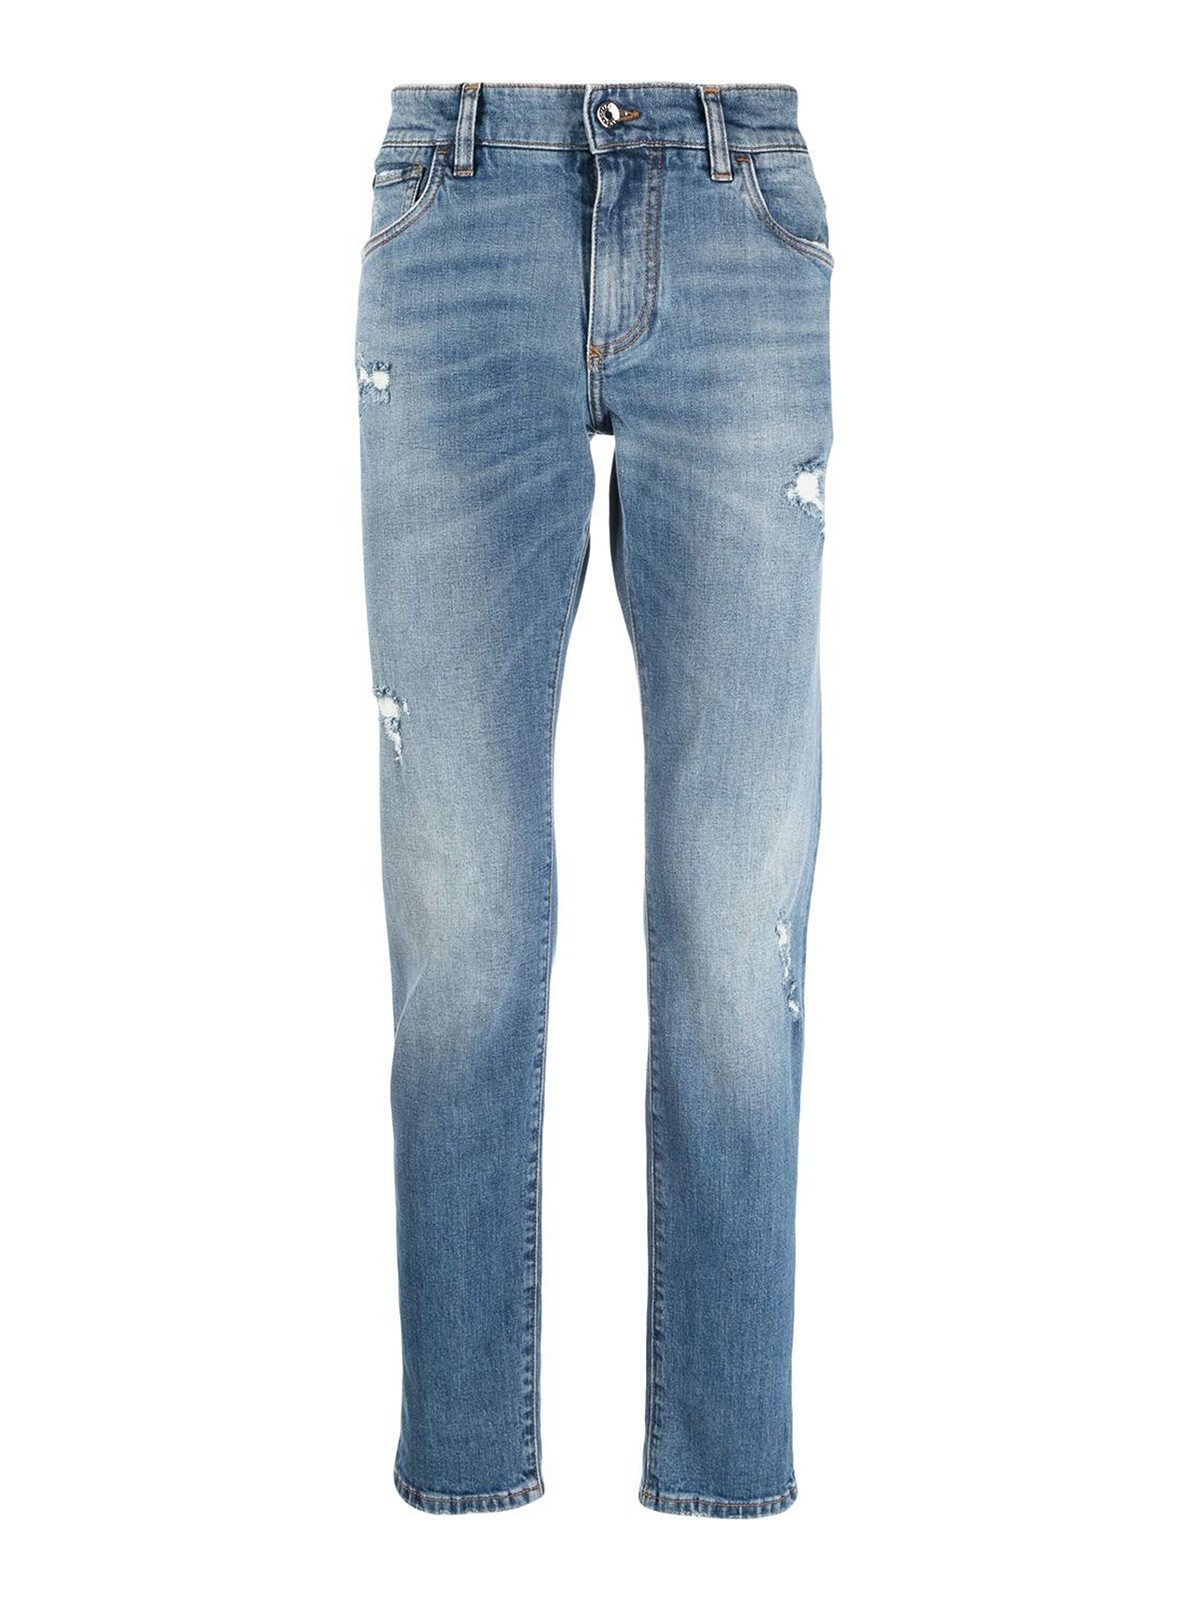 DOLCE & GABBANA JEANS WITH DISTRESSED EFFECT